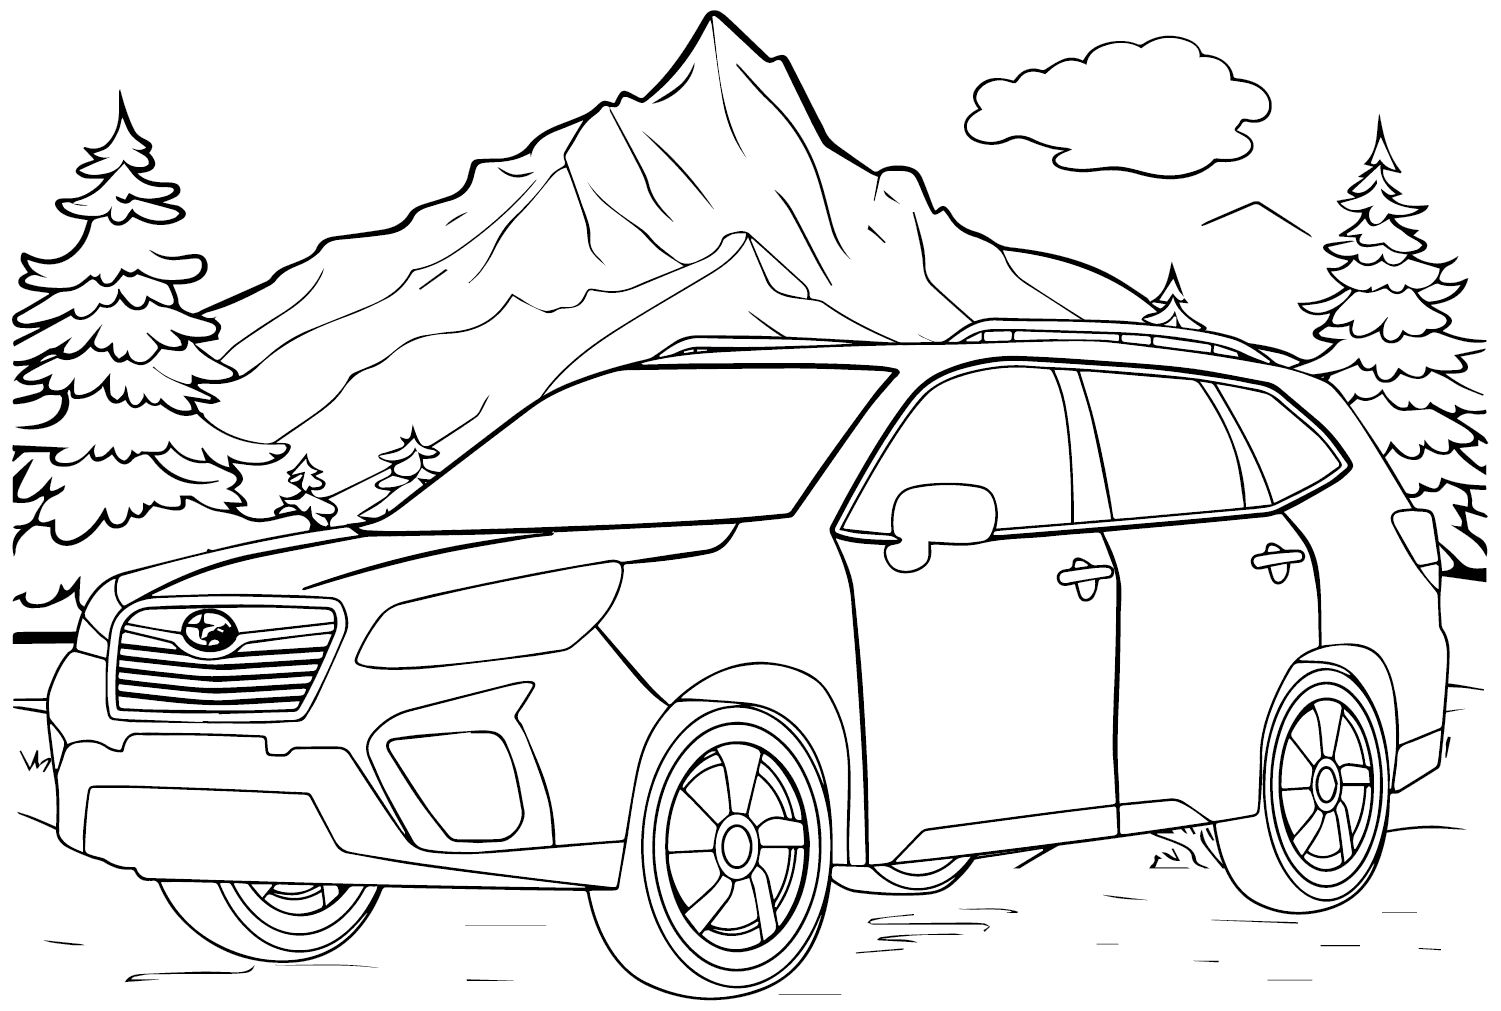 Subaru Forester Coloring Page from Subaru